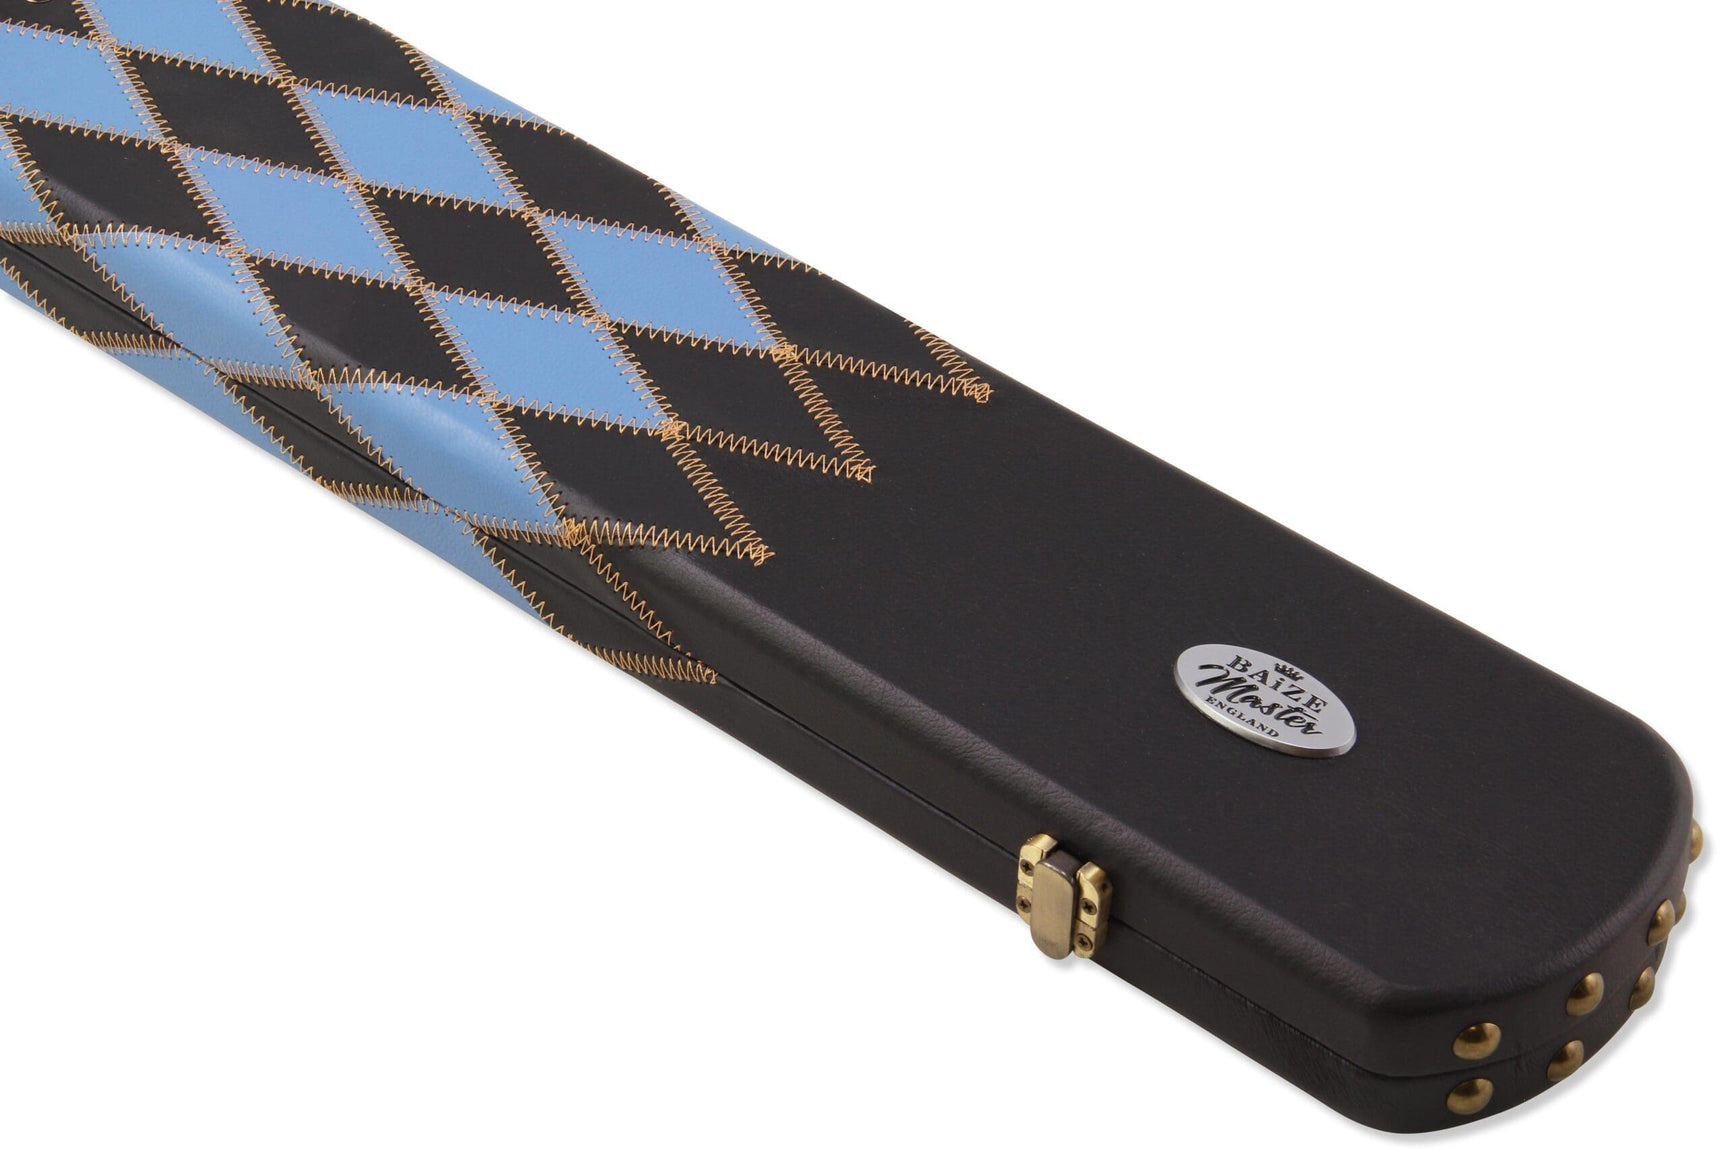 Baize Master 3/4 Joint WIDE 3 Slot BLUE DIAMONDS Luxury Round End Snooker Pool Cue Case with Studs - Holds 2 Cues